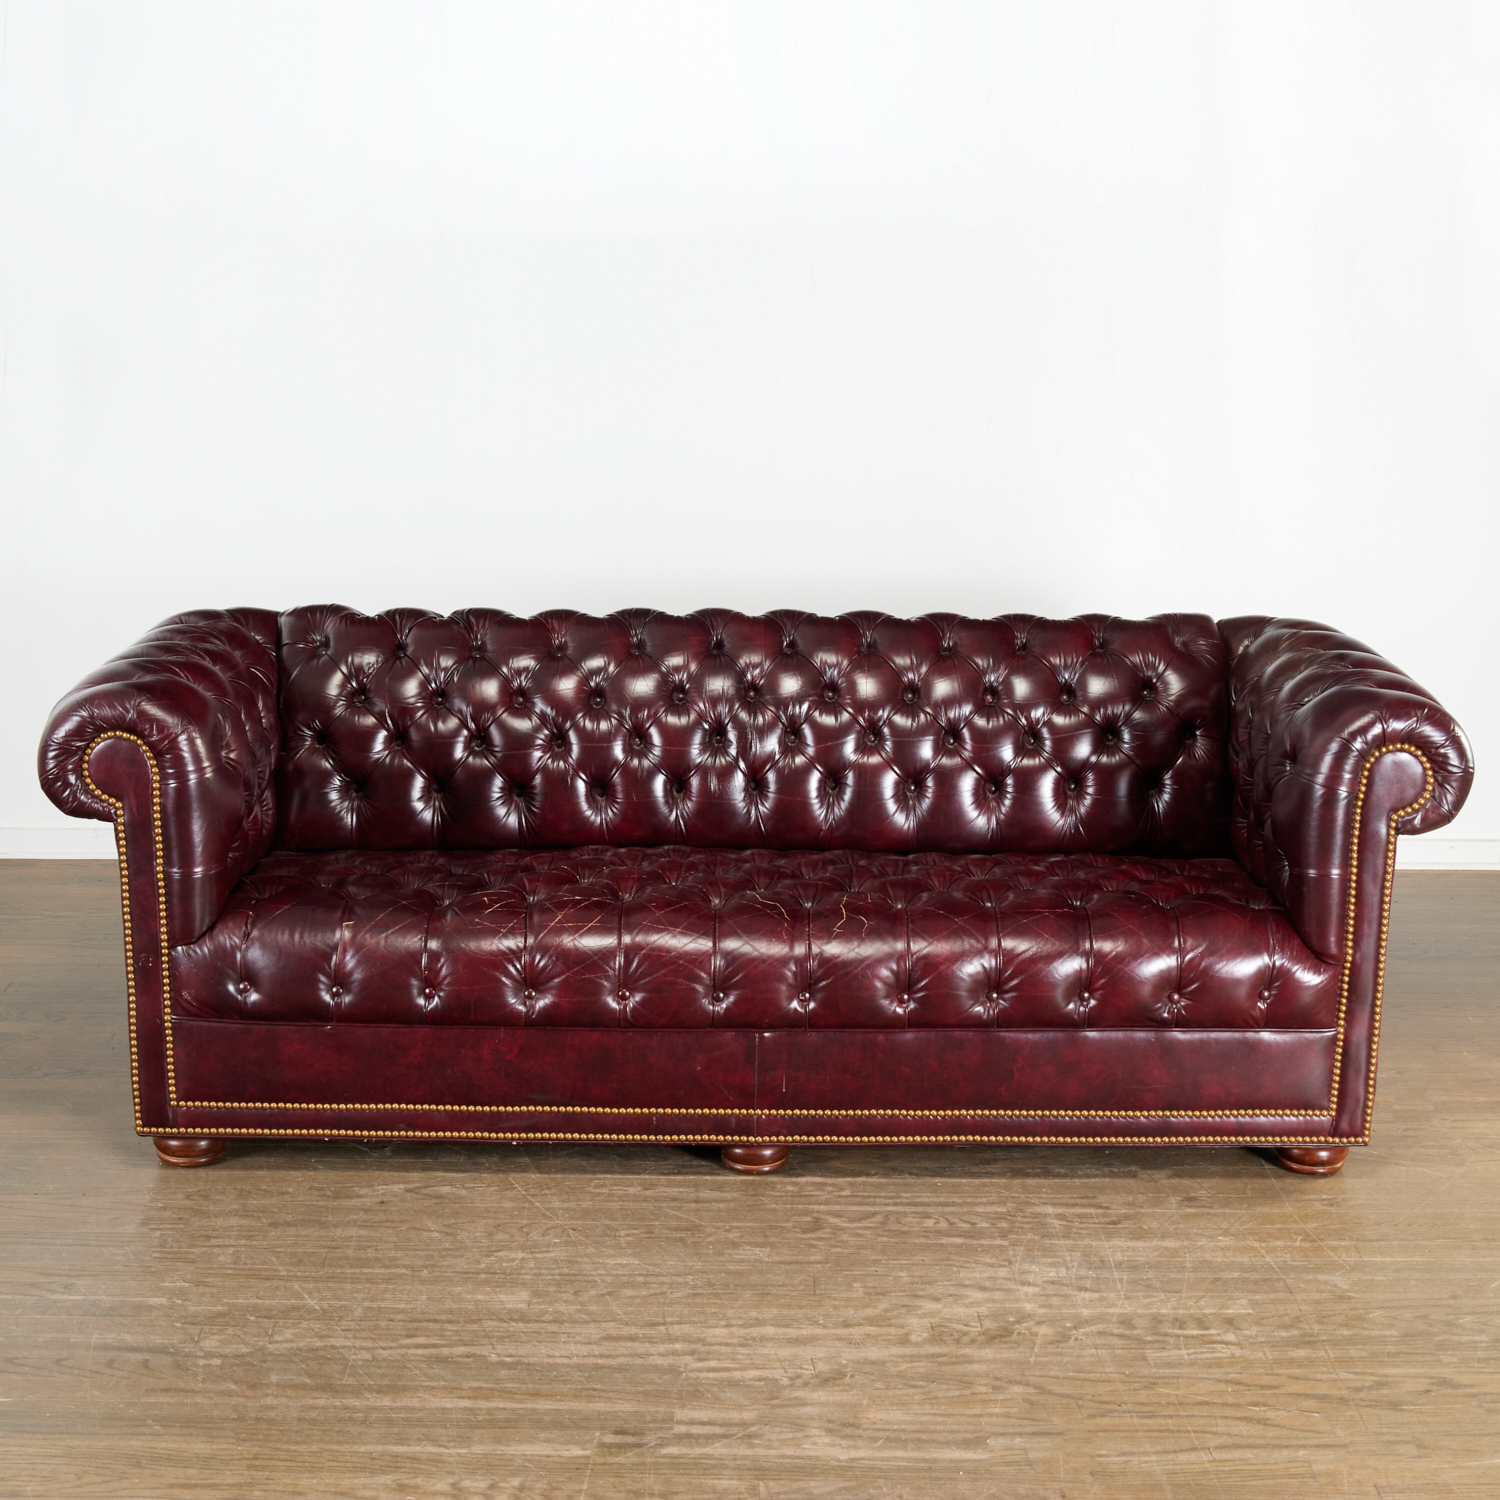 VINTAGE OXBLOOD LEATHER CHESTERFIELD 361be0